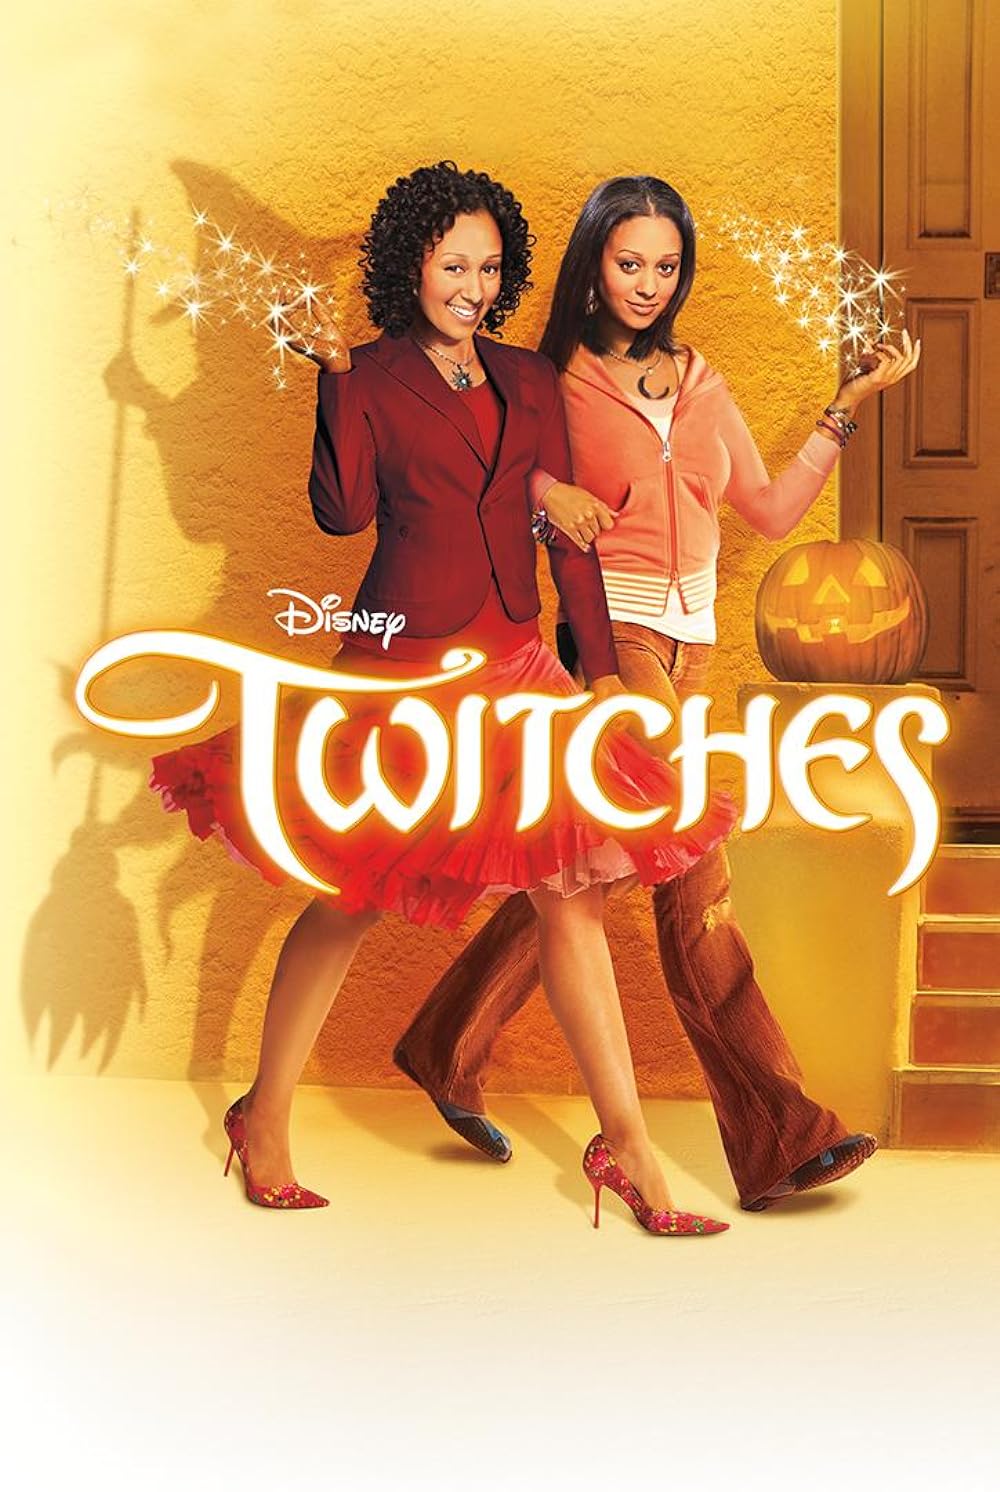 Twitches - Halloween Movies For Family